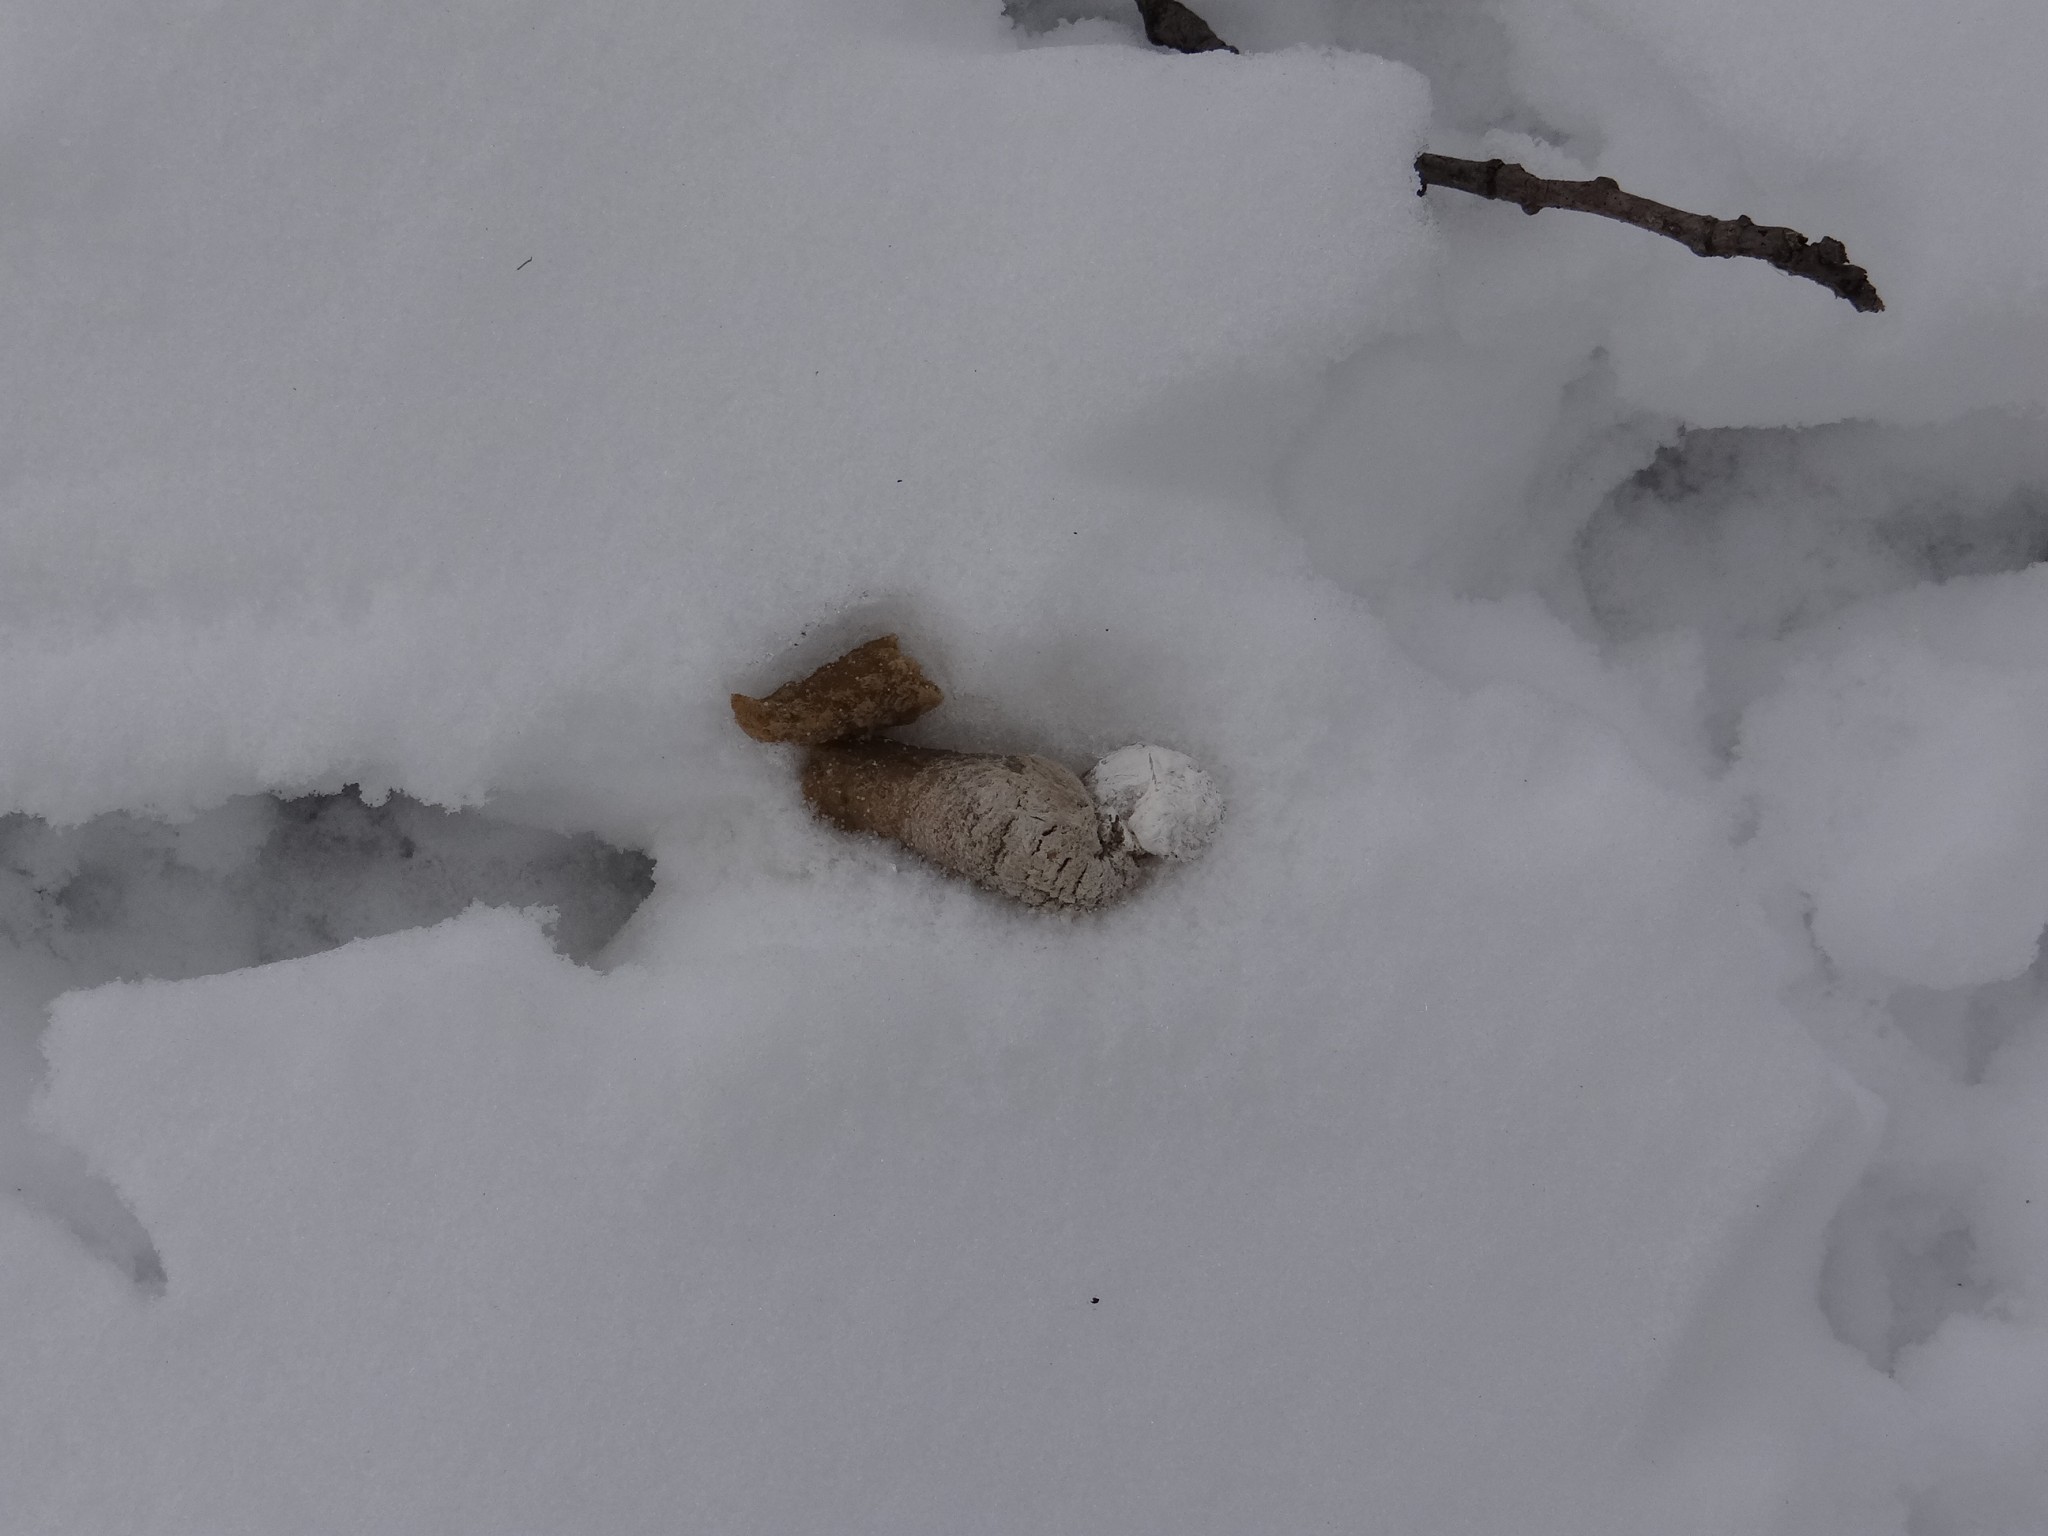 Fresh turkey droppings and tracks in snow.